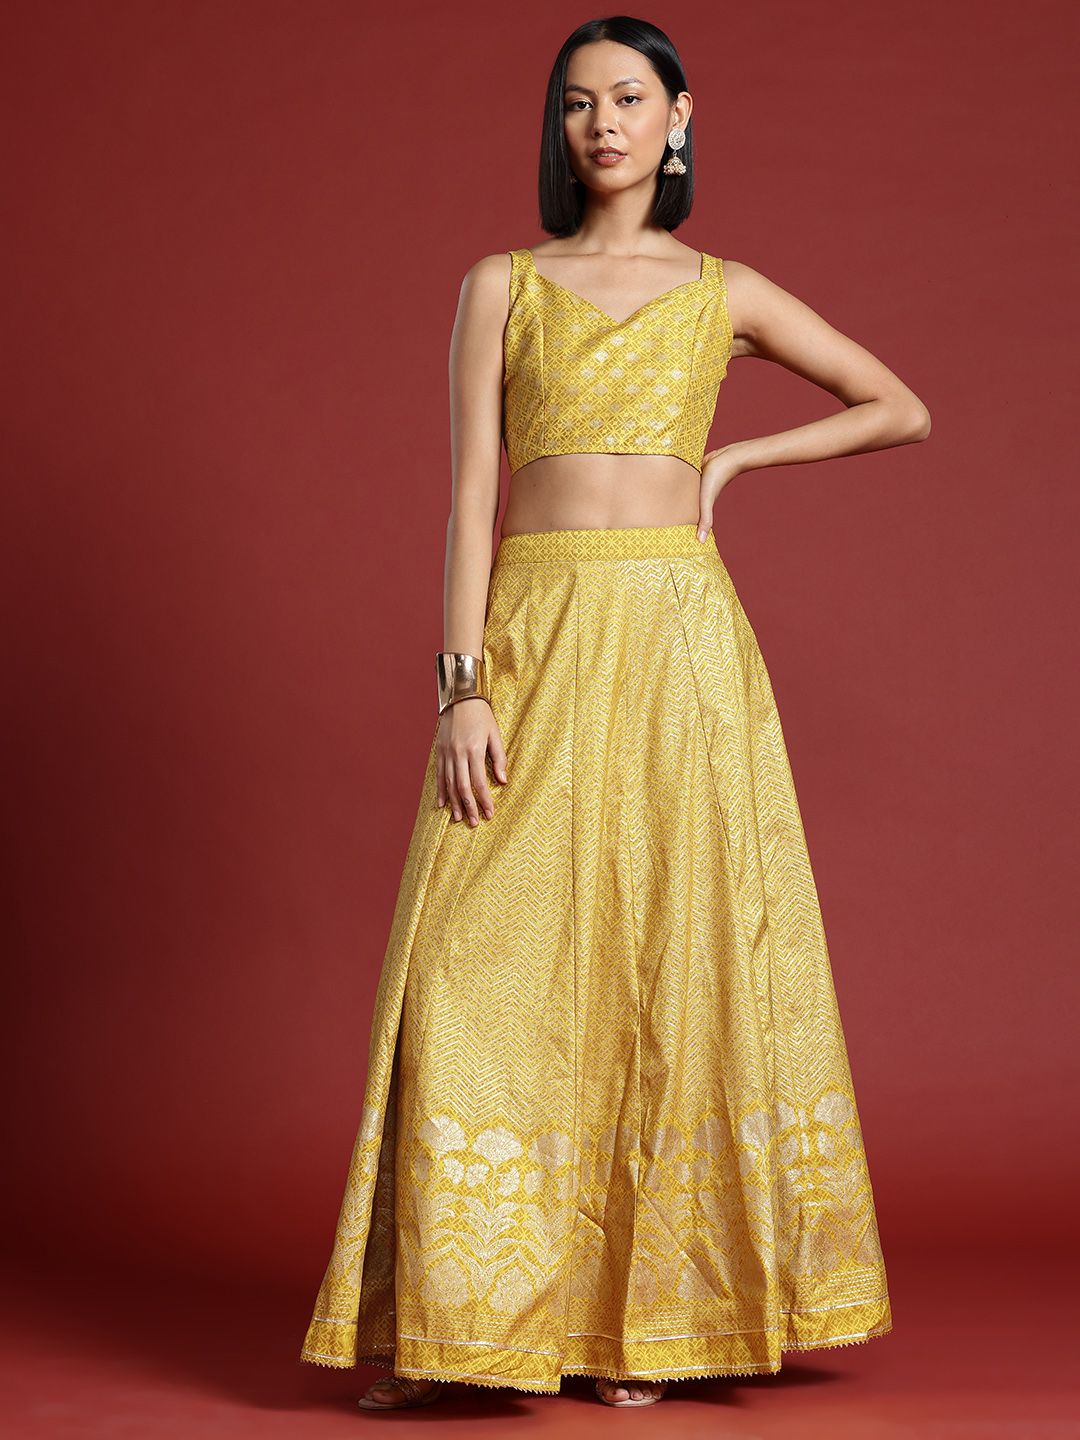 all about you Gotta-Patti Detailed Ethnic Printed Ready to Wear Lehenga & Choli Set Price in India